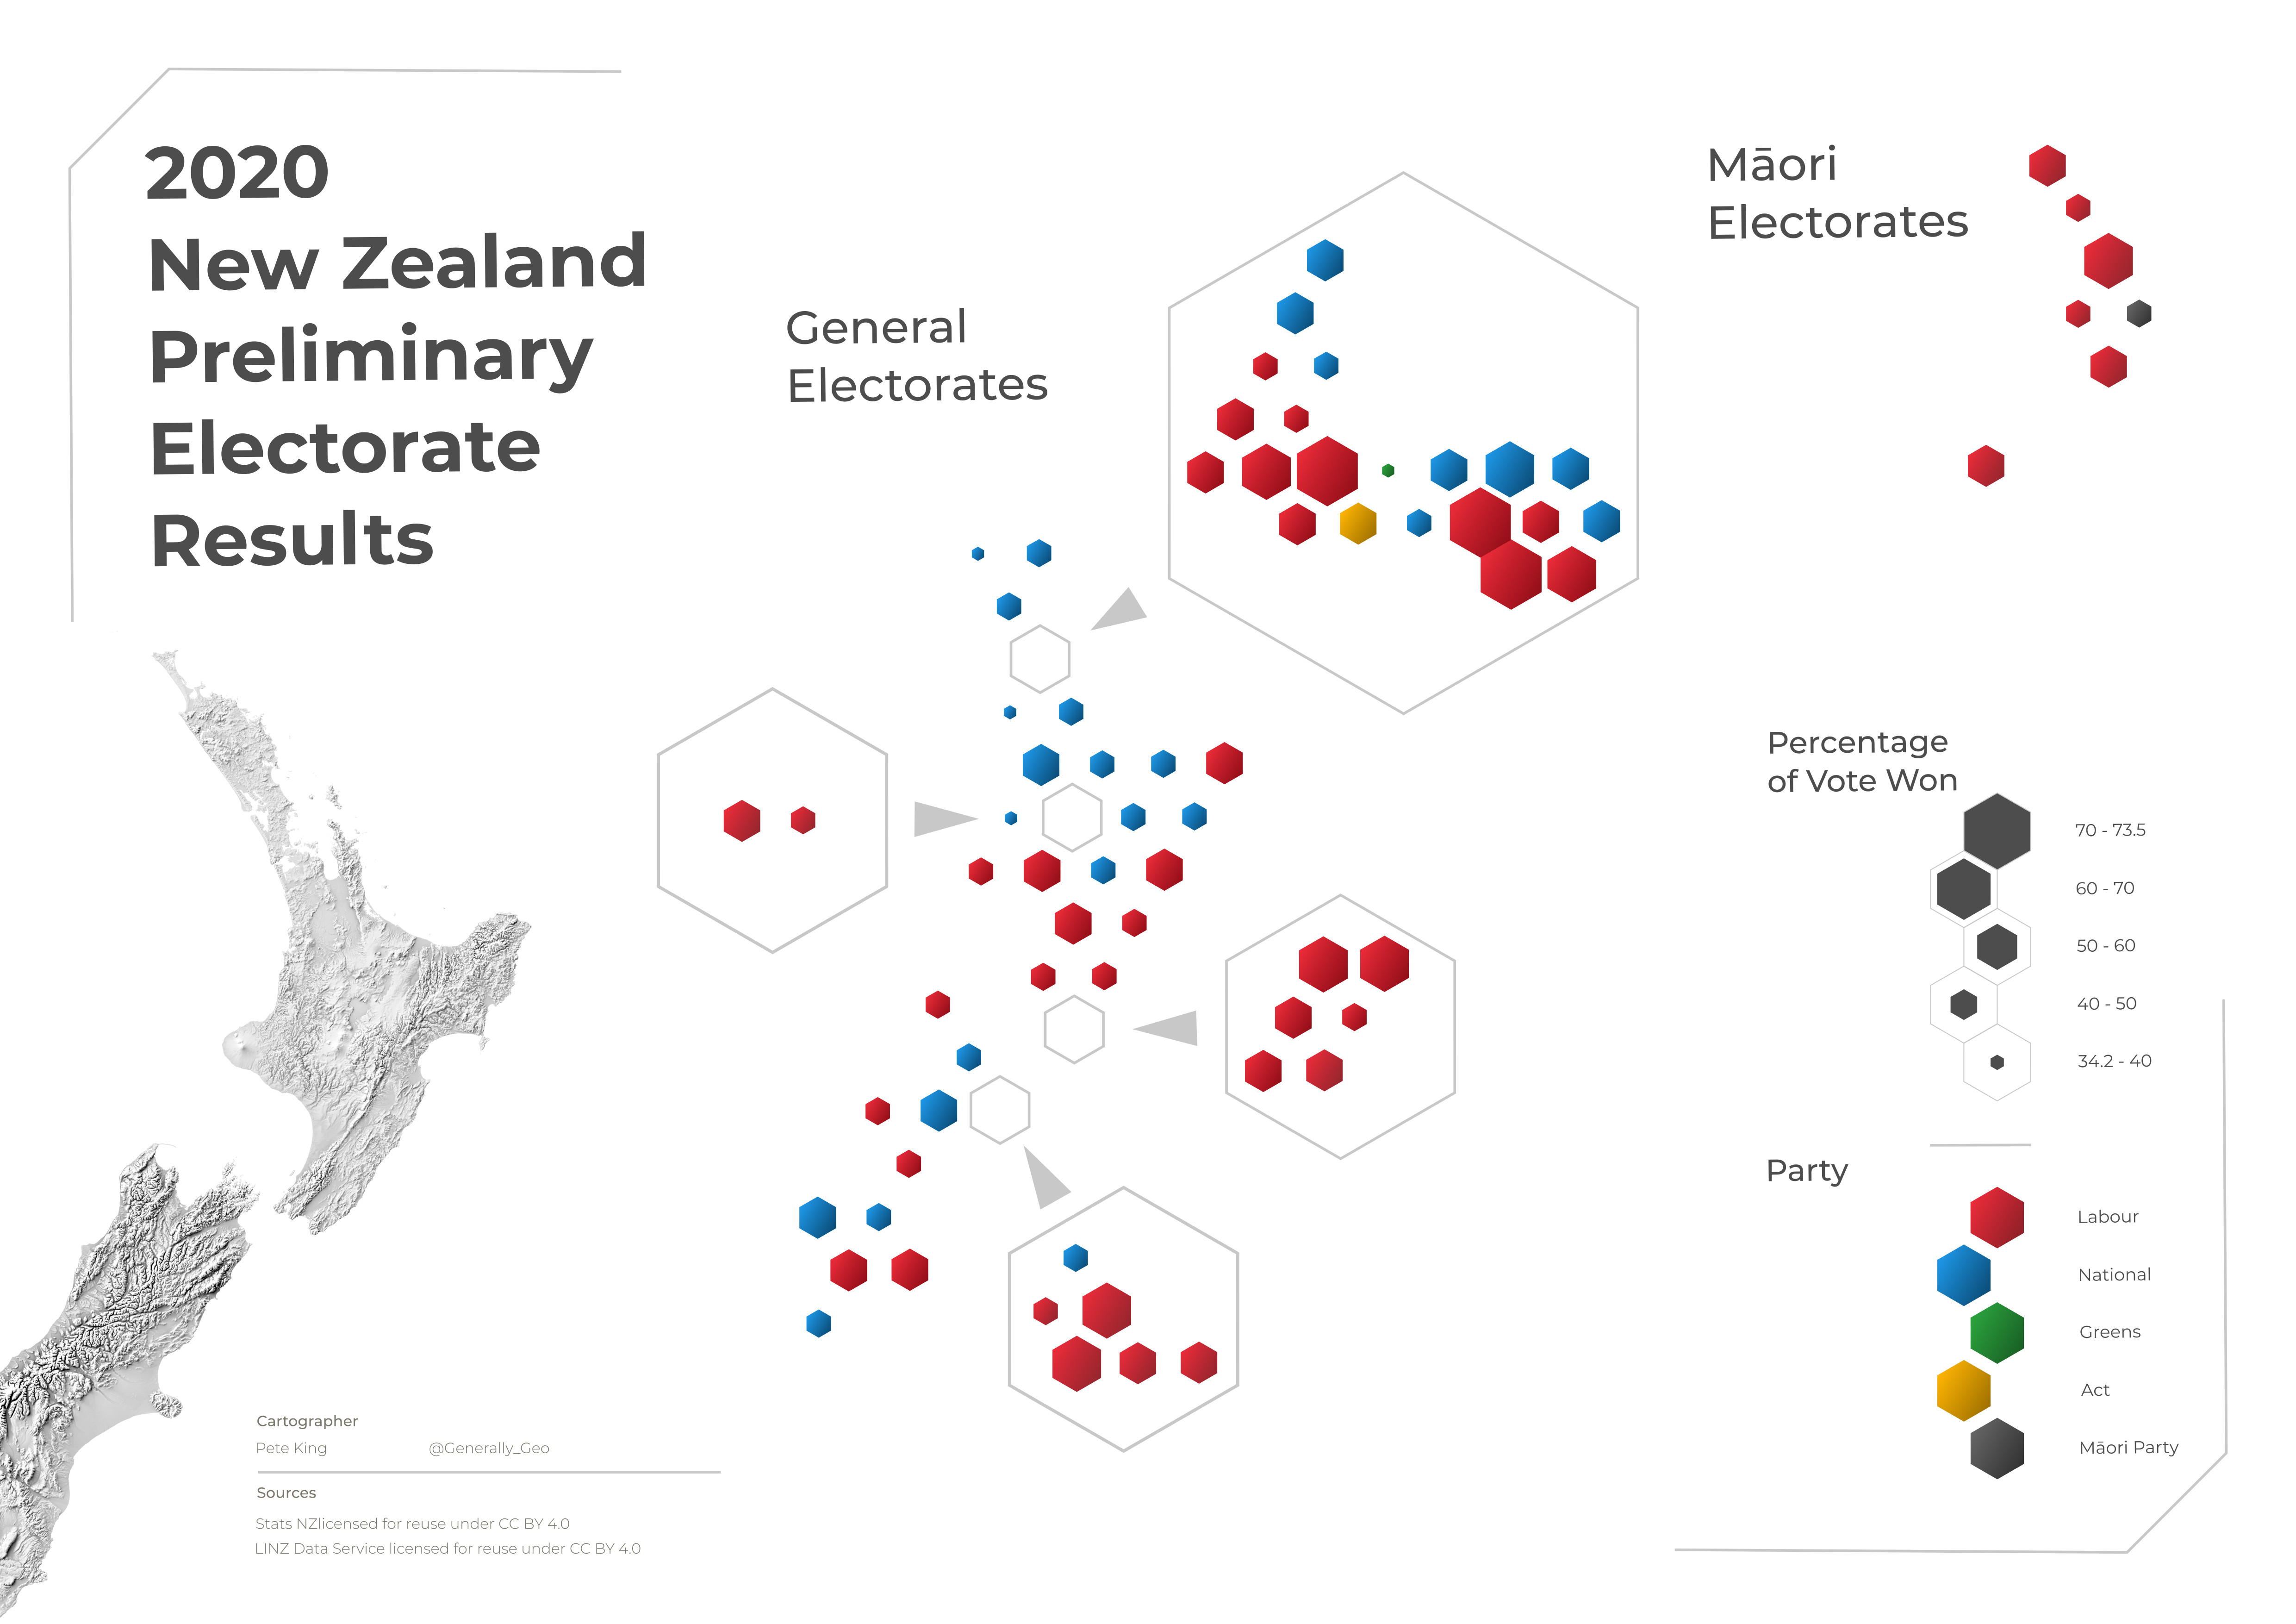 2020 New Zealand Preliminary Electoral Results